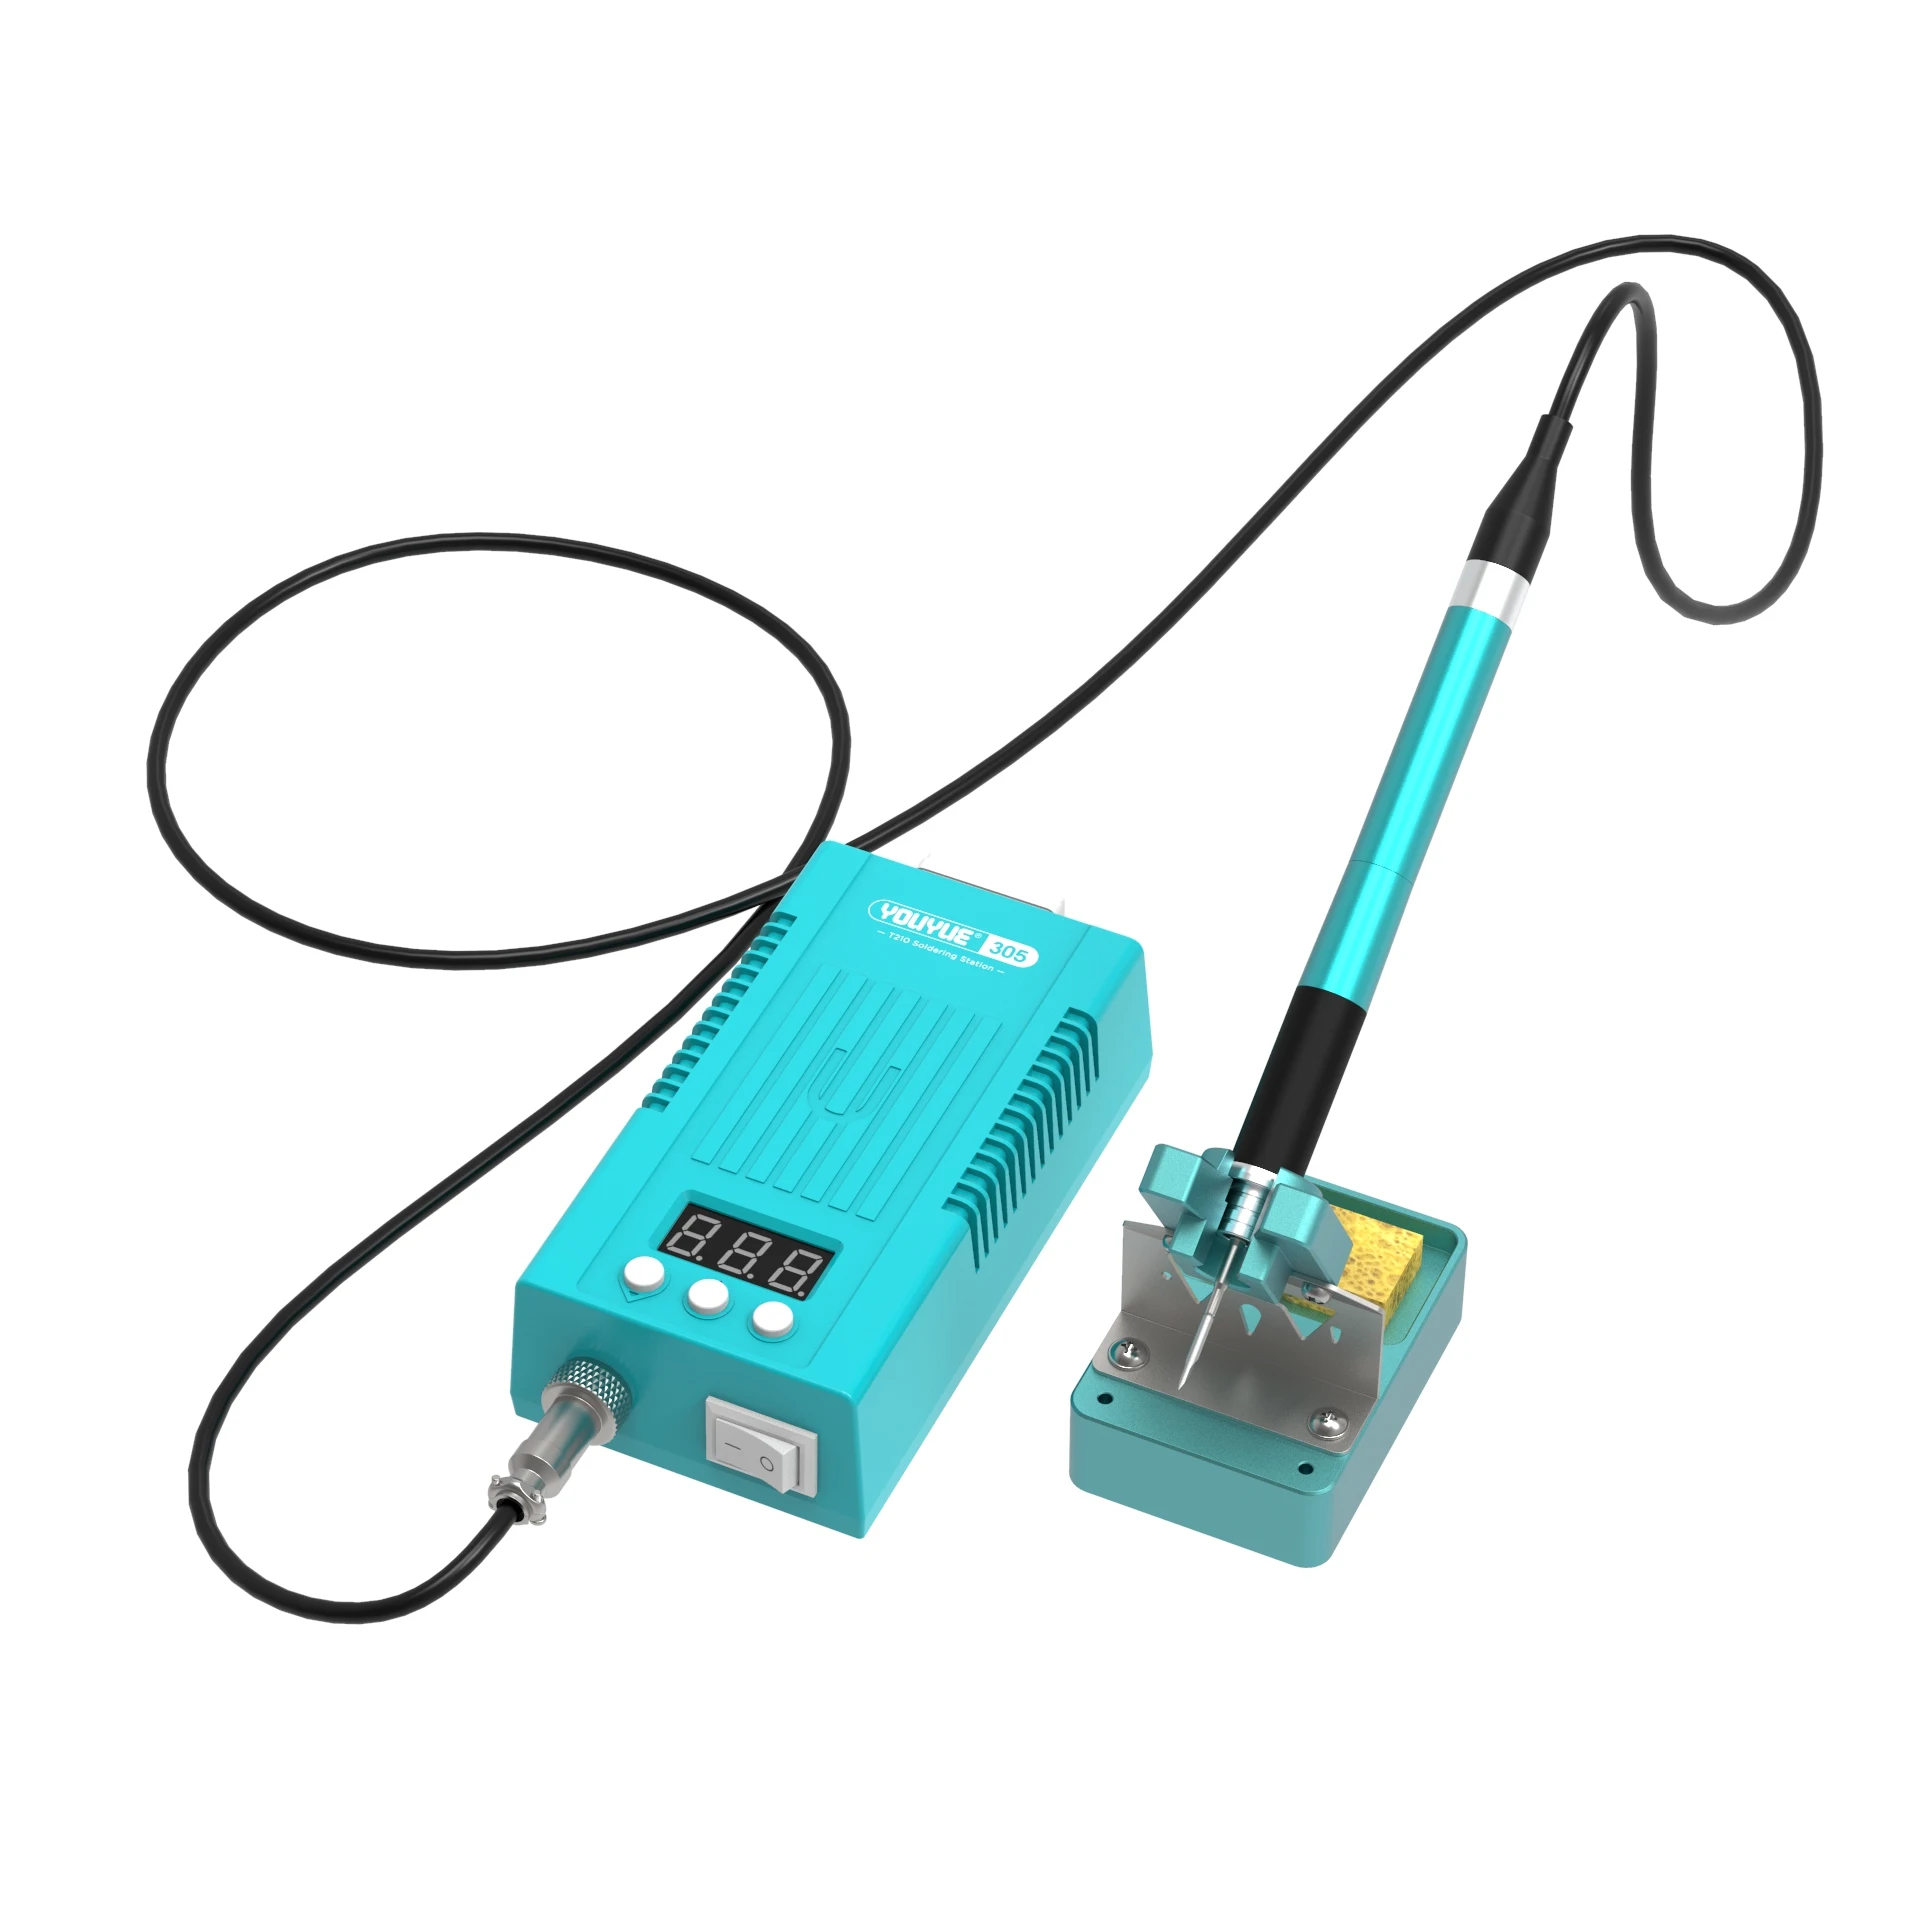 UYUE T210 75W Electric Digital Soldering Iron Station 220V 110V Temperature Adjustable Welding Soldering Tips Tools Accessories